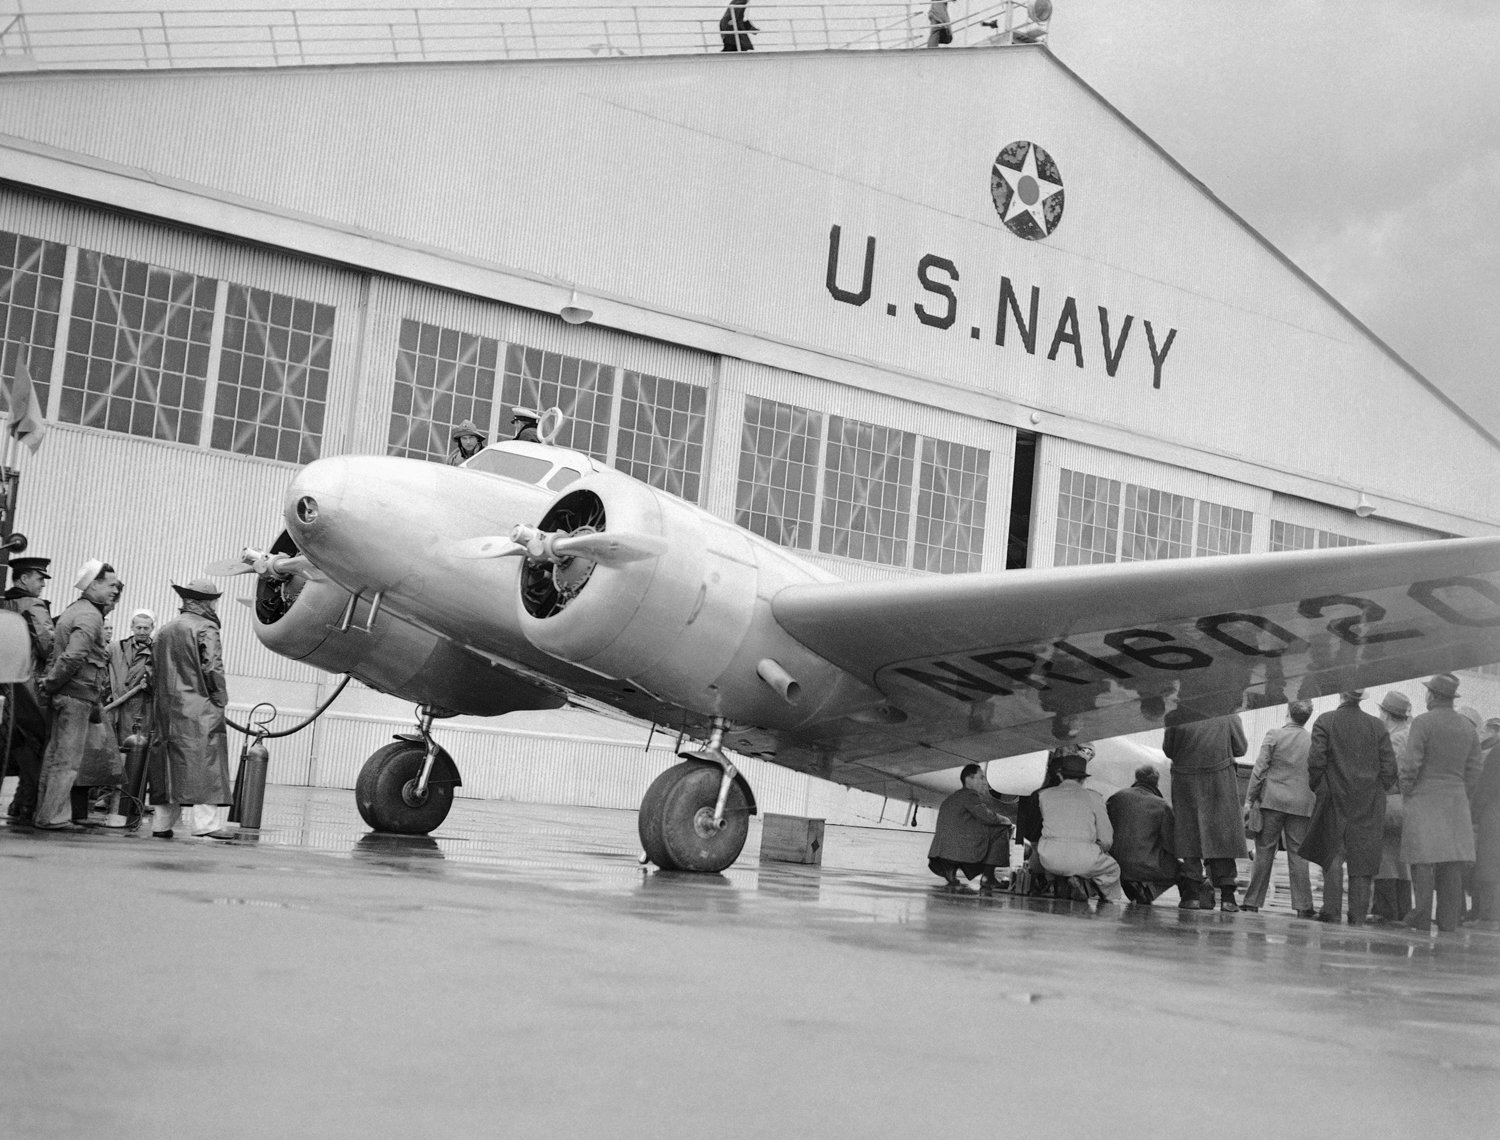  Preparation of the Lockheed Electra plane, used for round-the-world flight by Amelia Earhart is shown in 1937, Oakland., Calif. (AP Photo) 